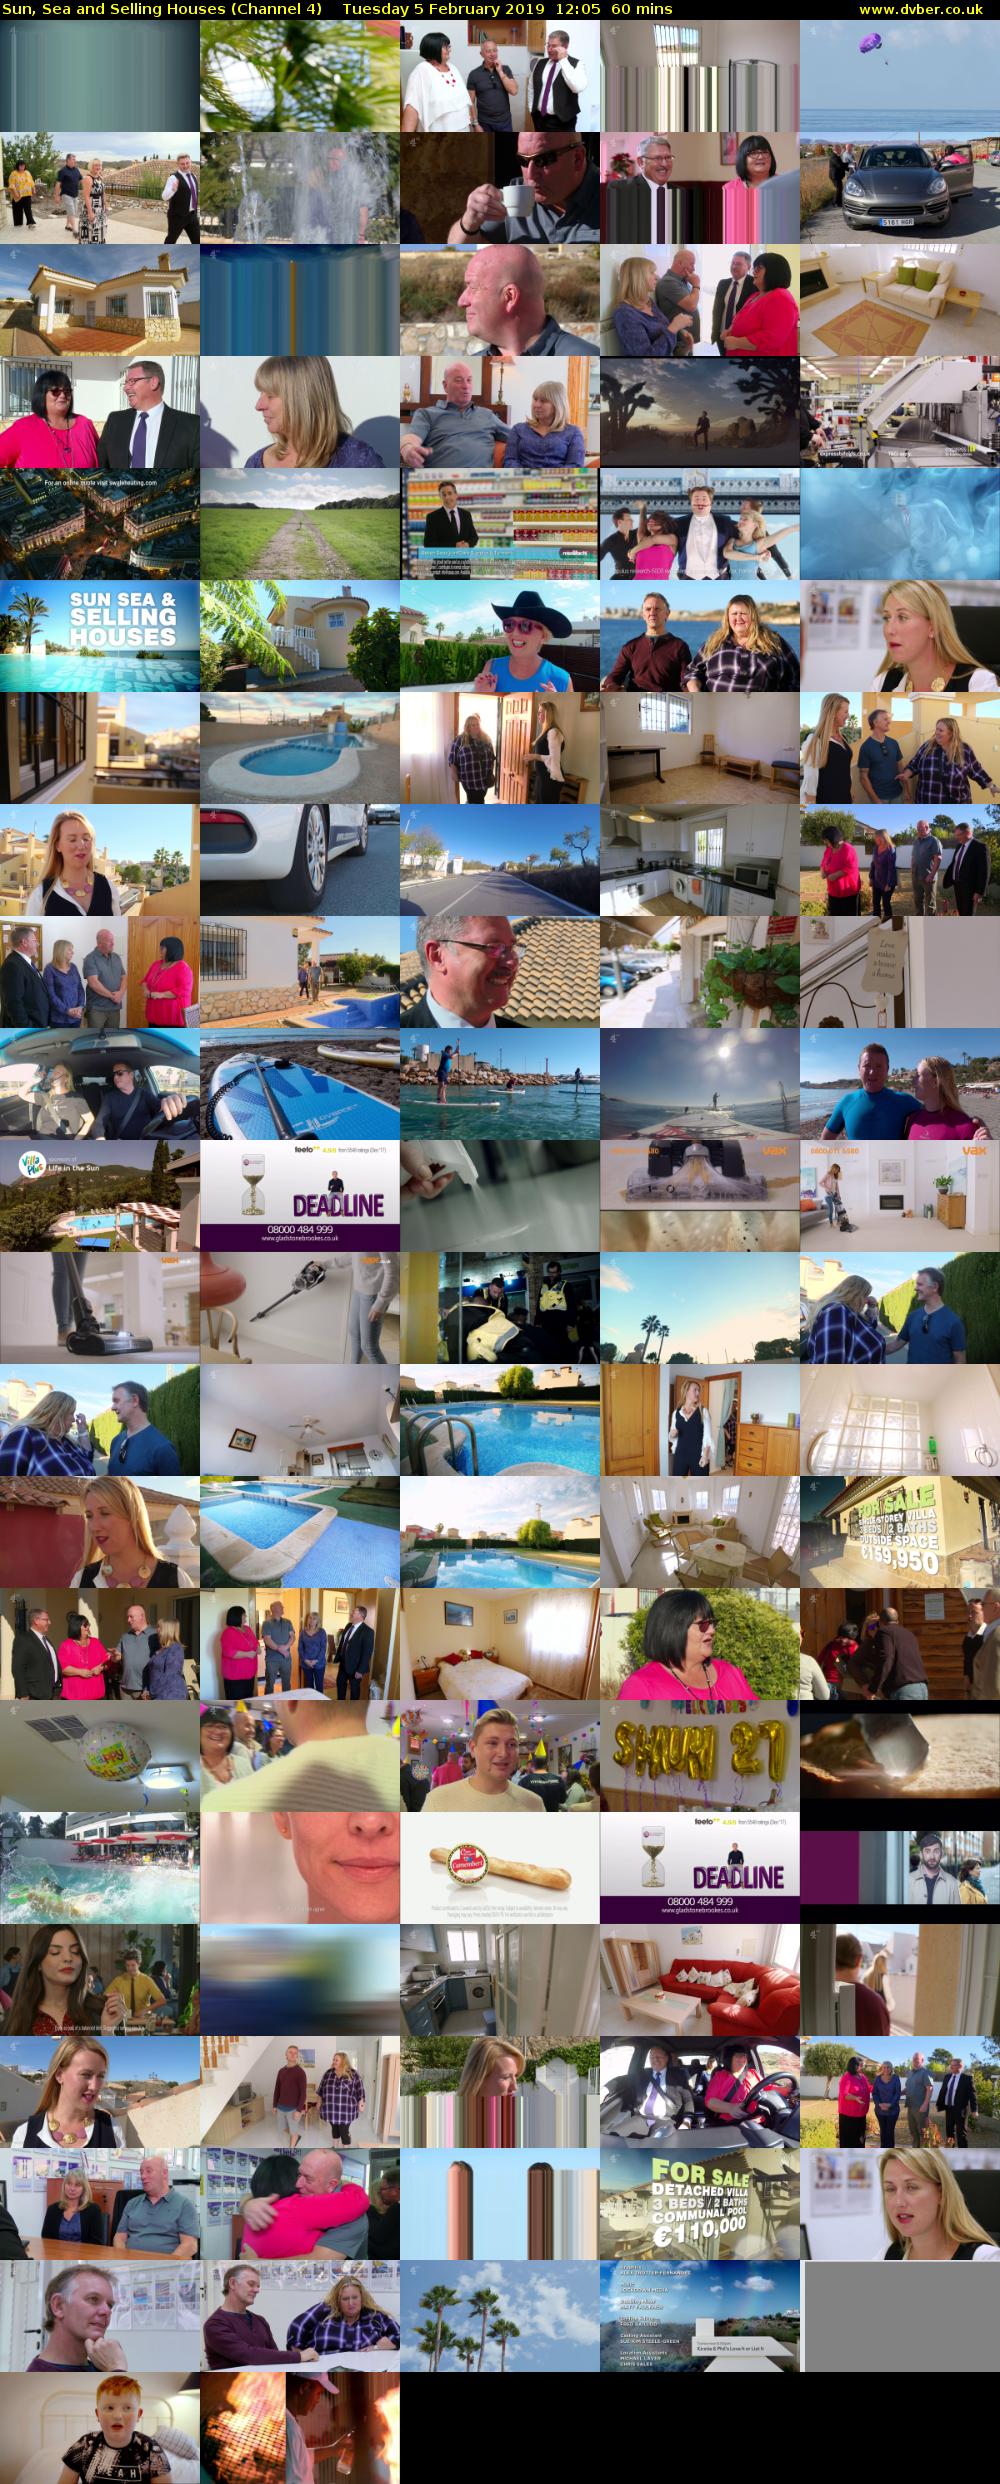 Sun, Sea and Selling Houses (Channel 4) Tuesday 5 February 2019 12:05 - 13:05